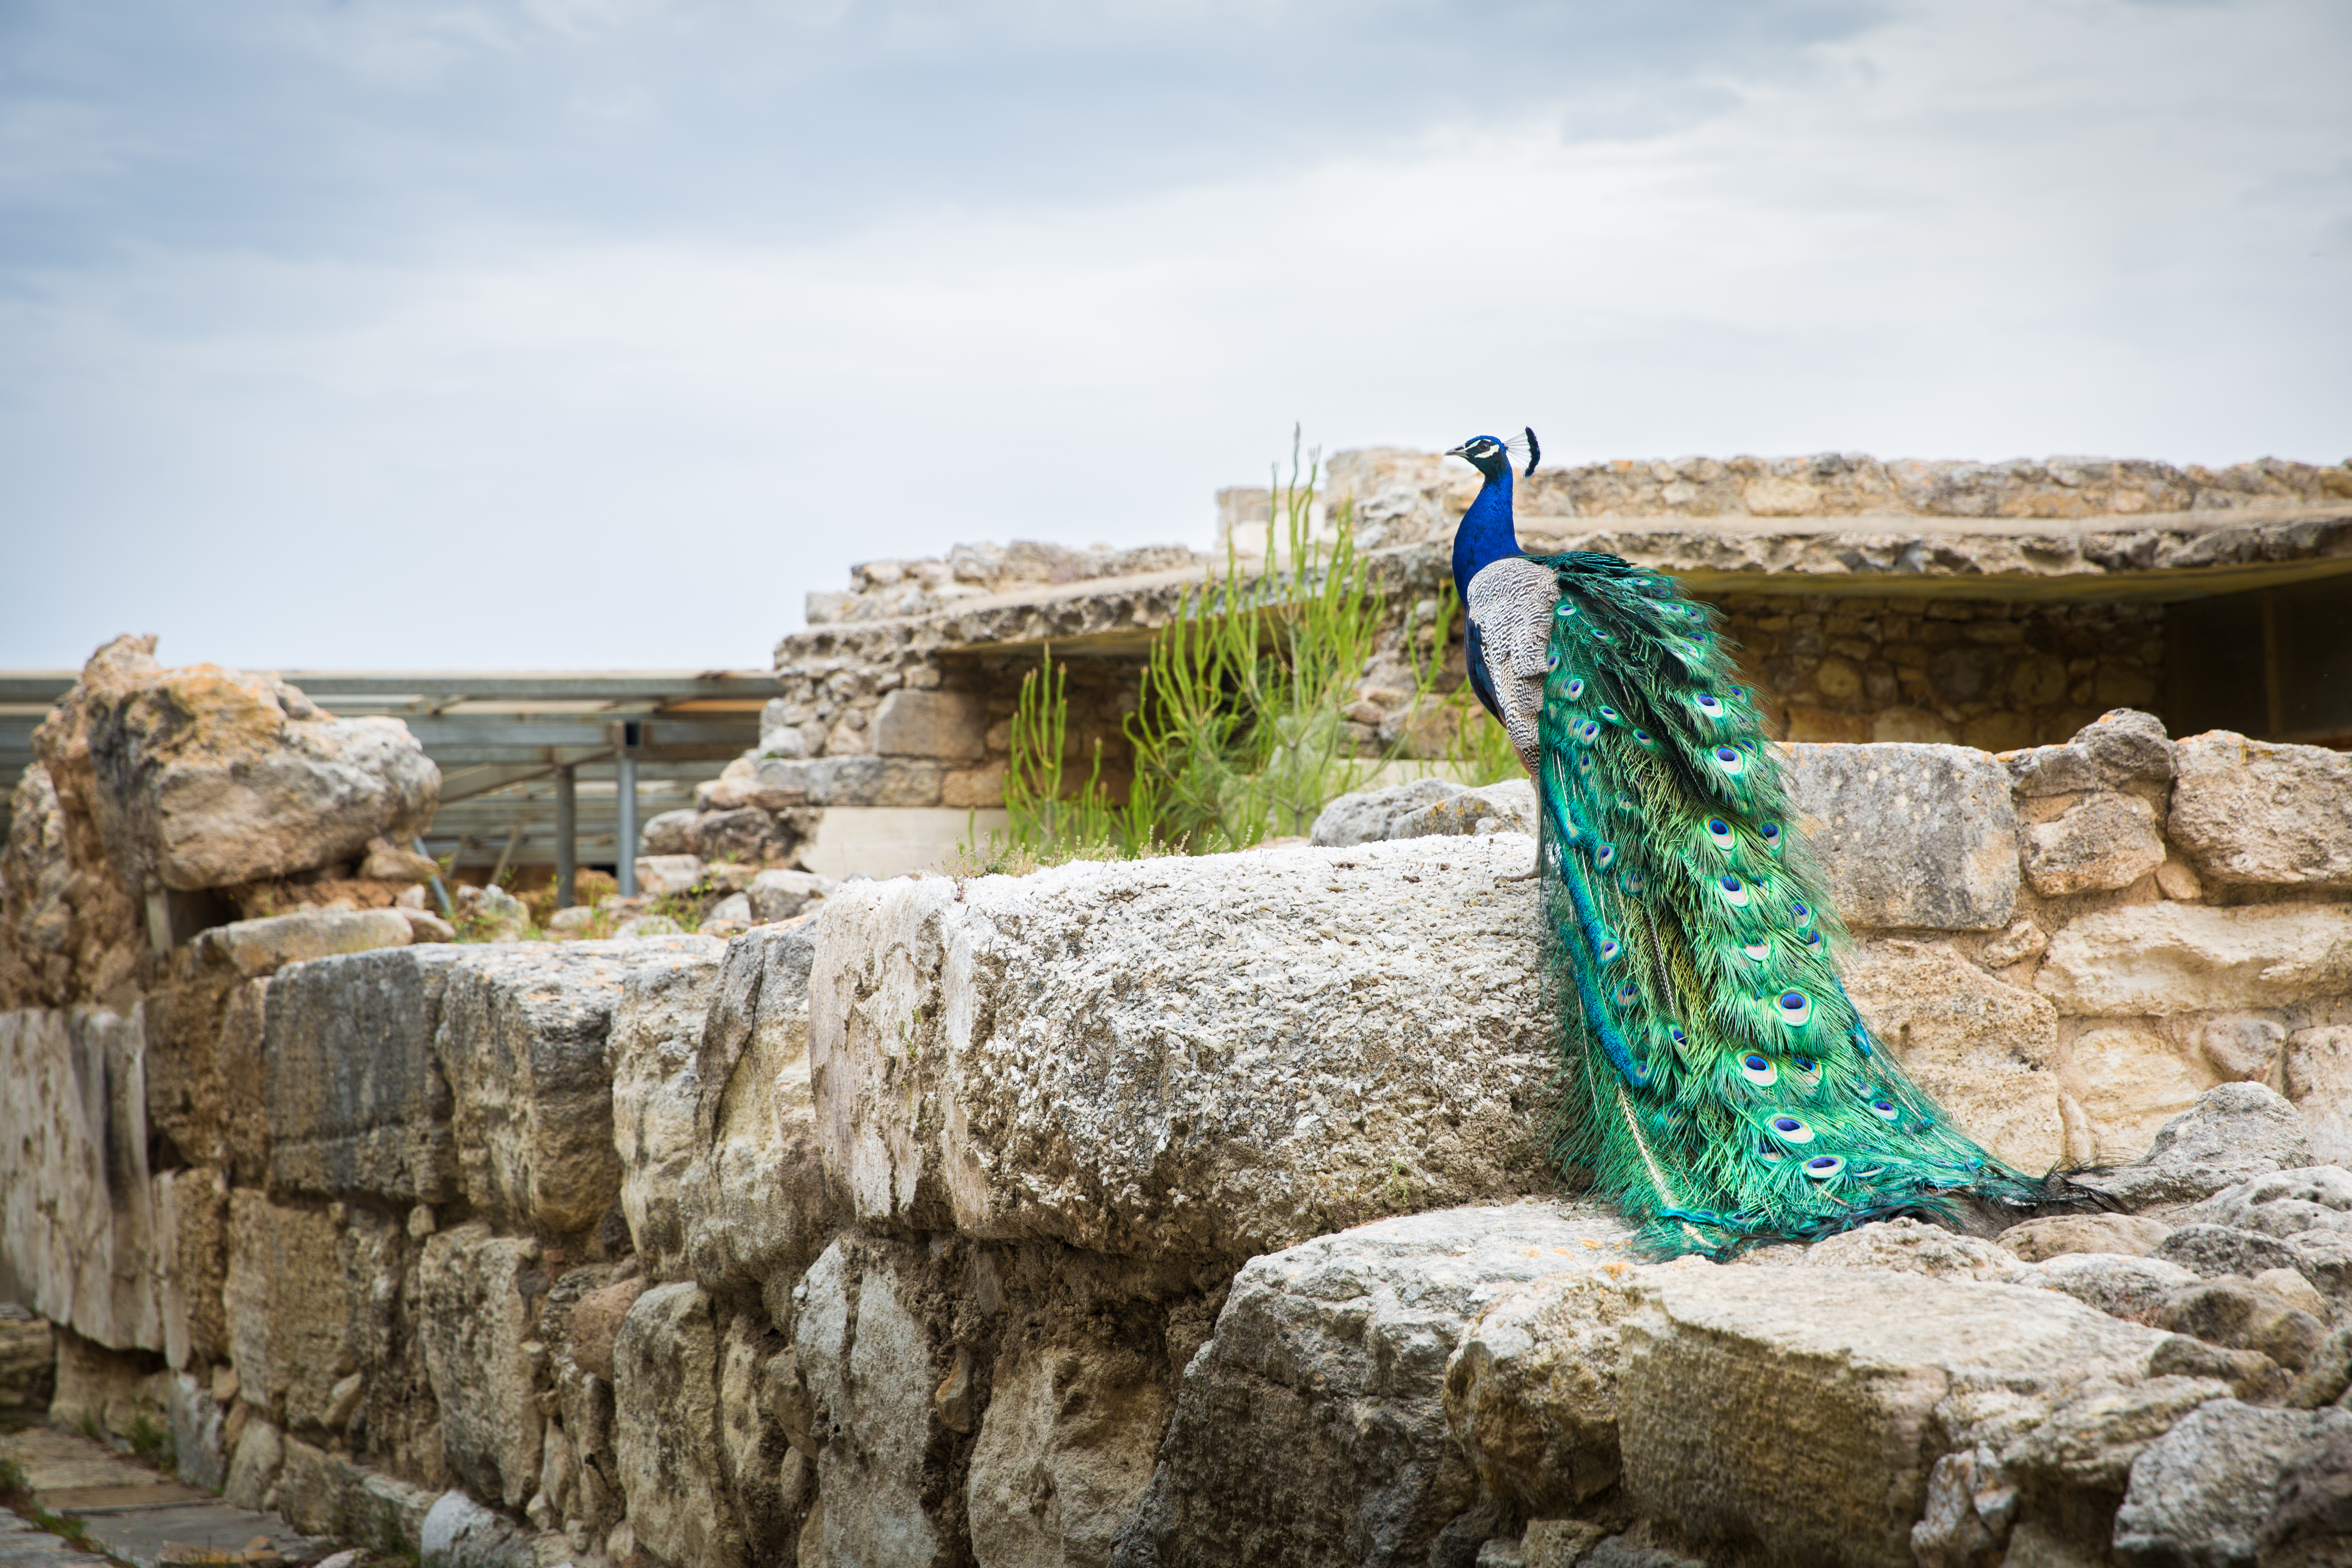 Image of a peacock stood in Greek ruins